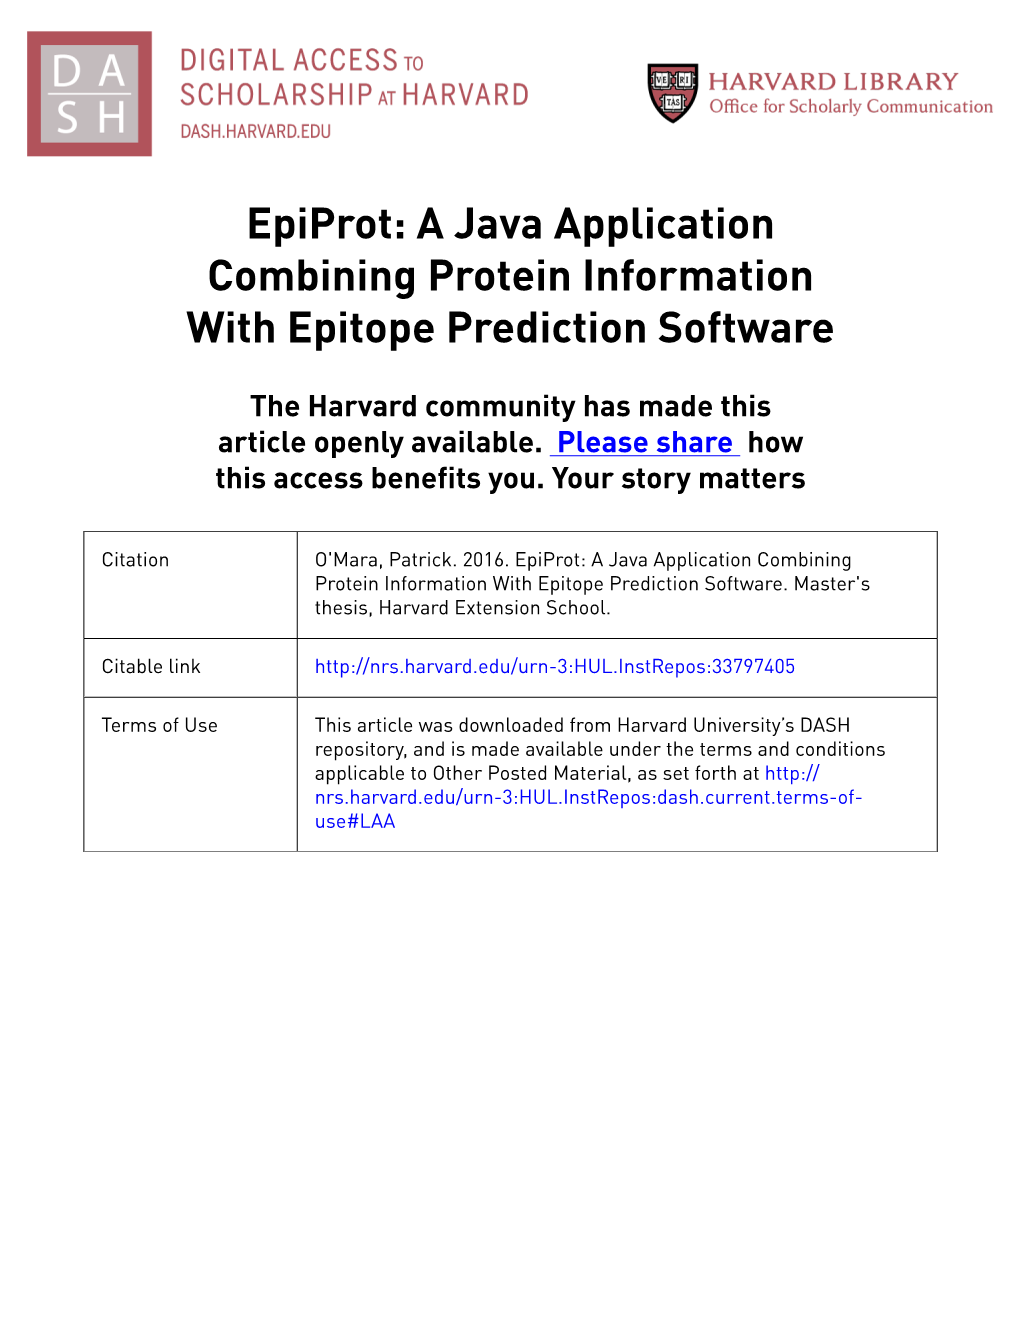 A Java Application Combining Protein Information with Epitope Prediction Software